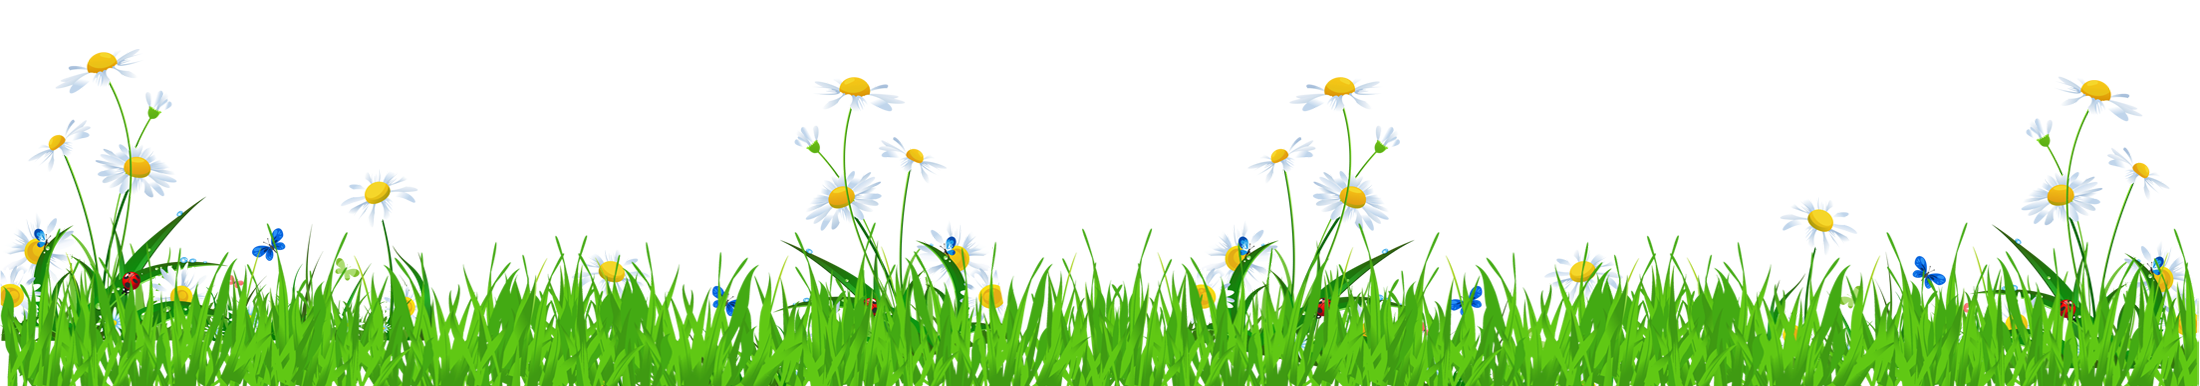 Daisy clipart grass. With daisies and ladybugs